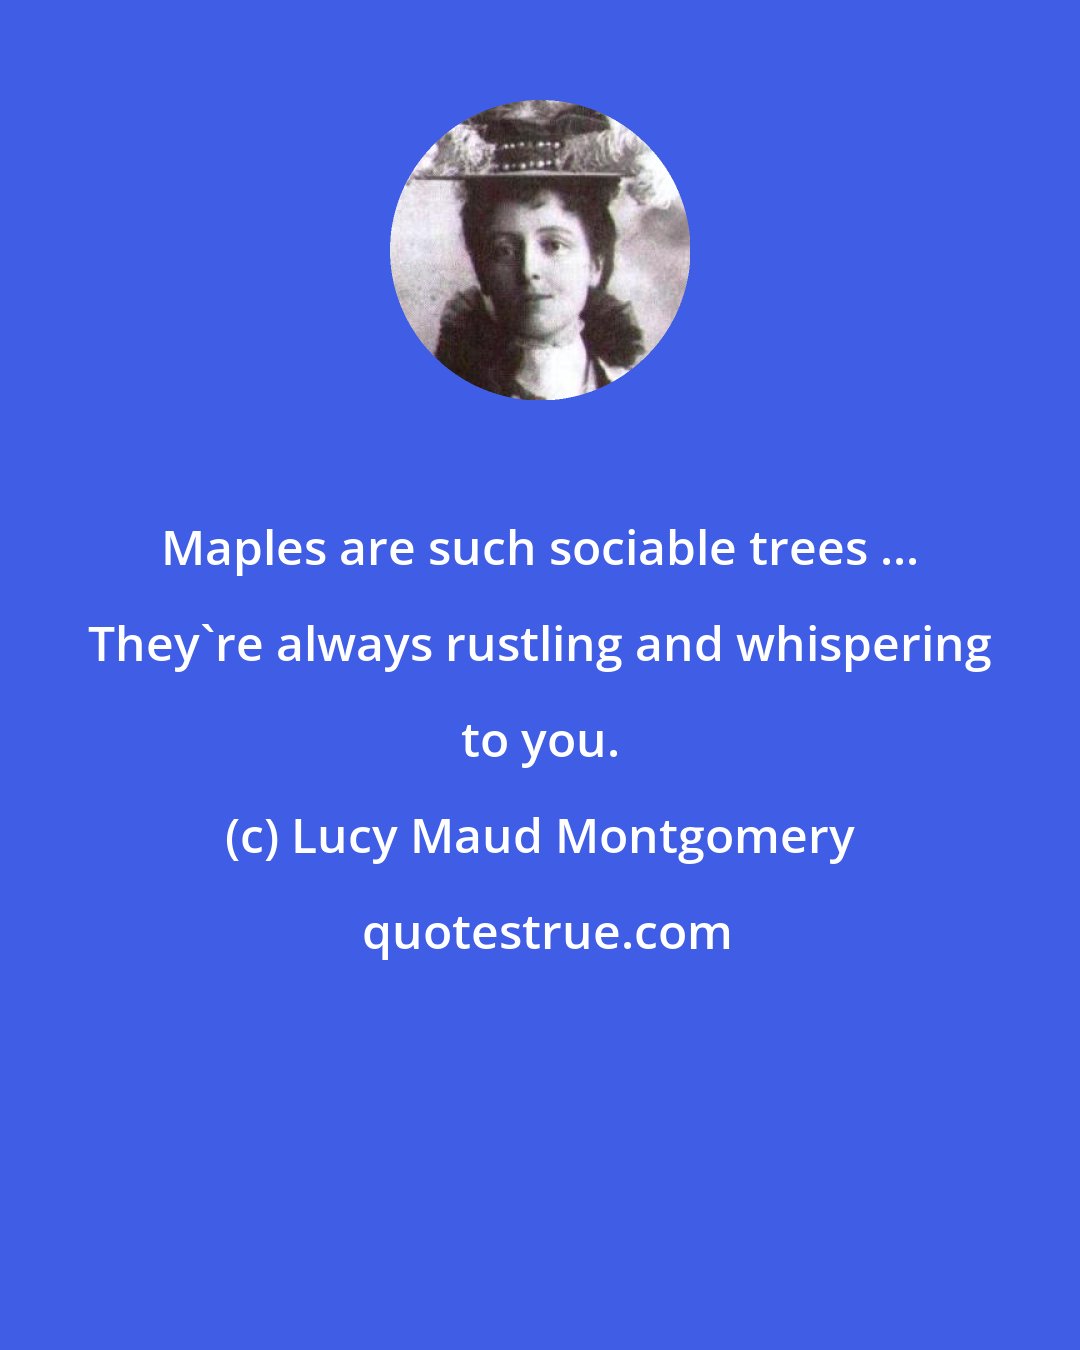 Lucy Maud Montgomery: Maples are such sociable trees ... They're always rustling and whispering to you.